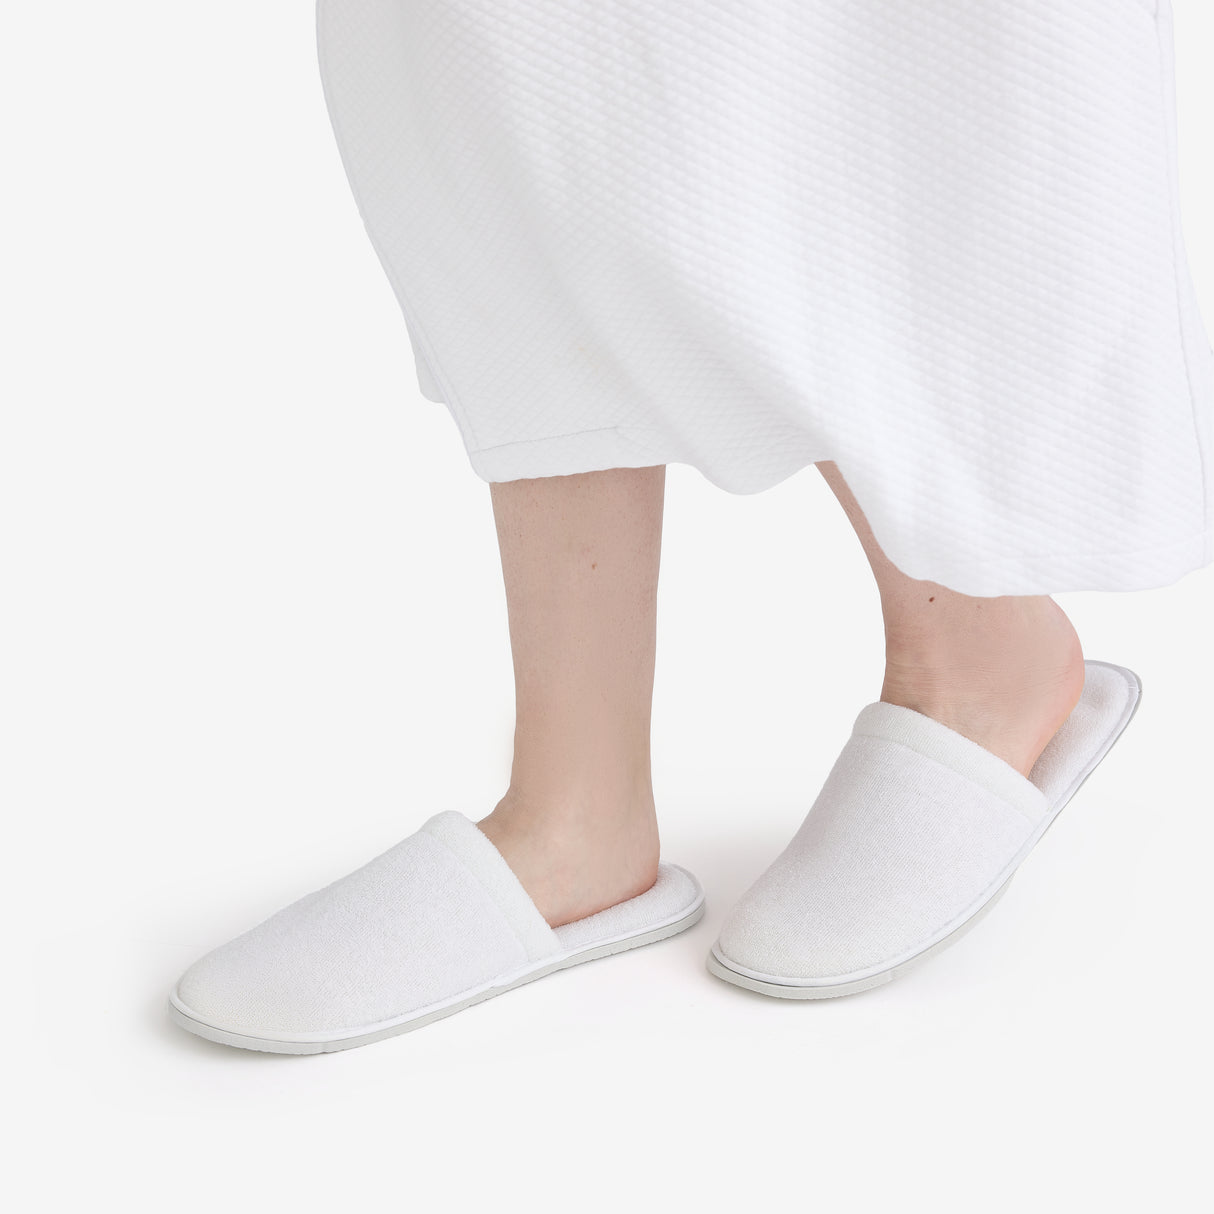 Closed toe white hotel slippers, worn by someone, on a white background.